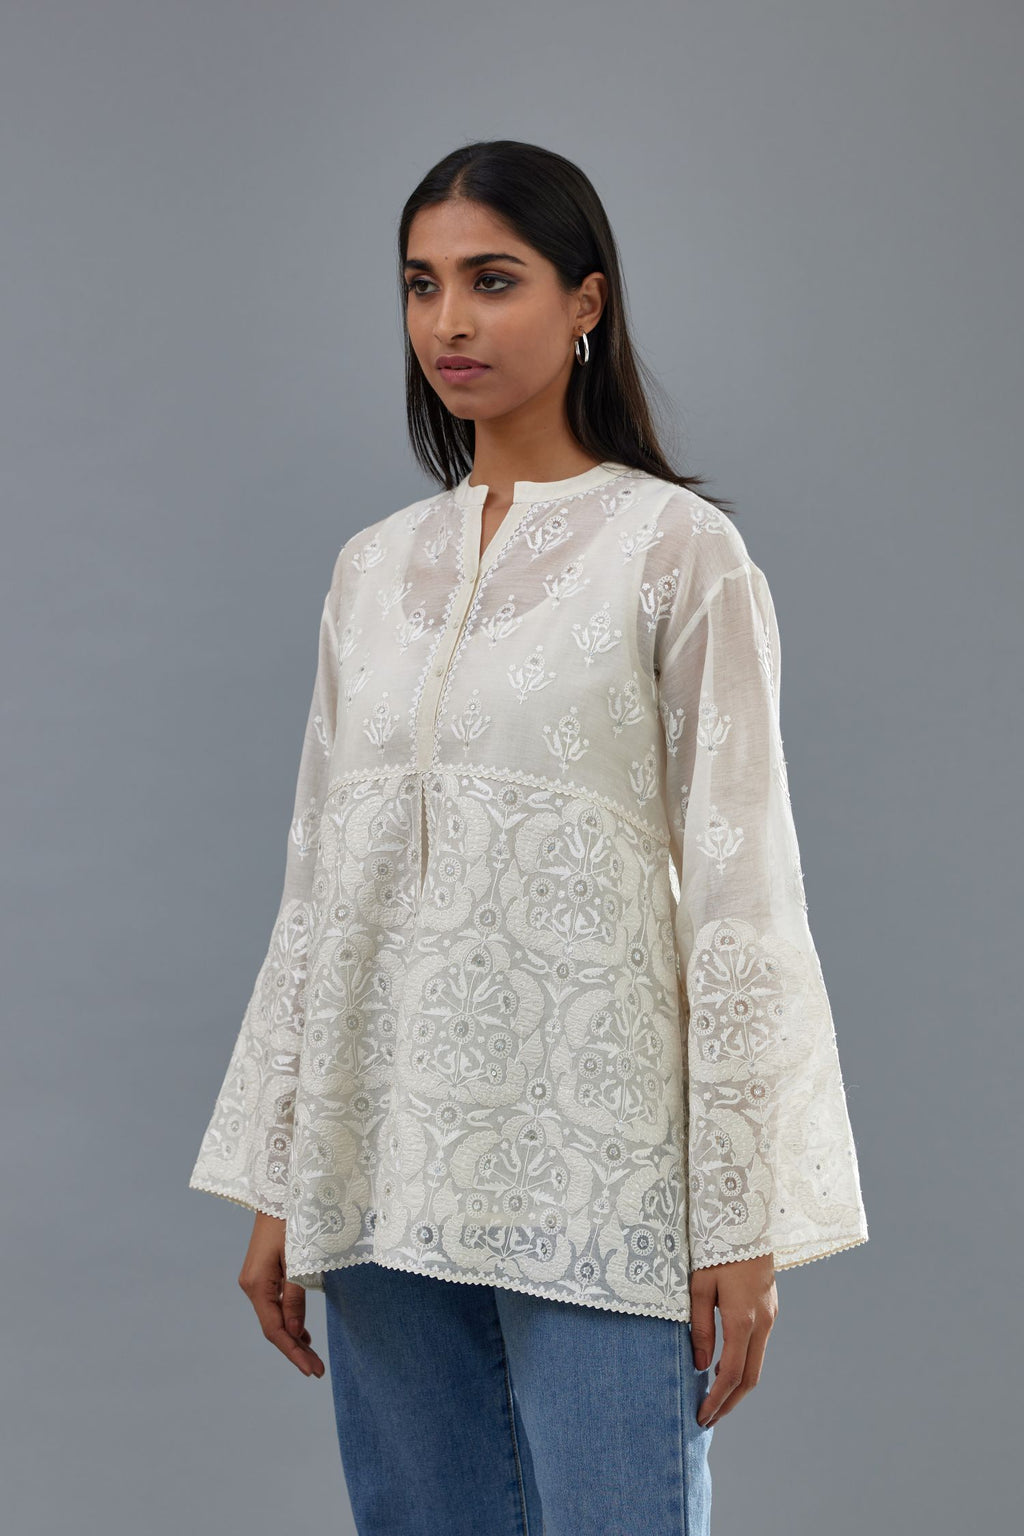 Off white cotton chanderi short top with heavy appliqué, highlighted with sequins, paired with off white cotton straight pants with appliqué and hand attached sequins detailing at bottom hem.